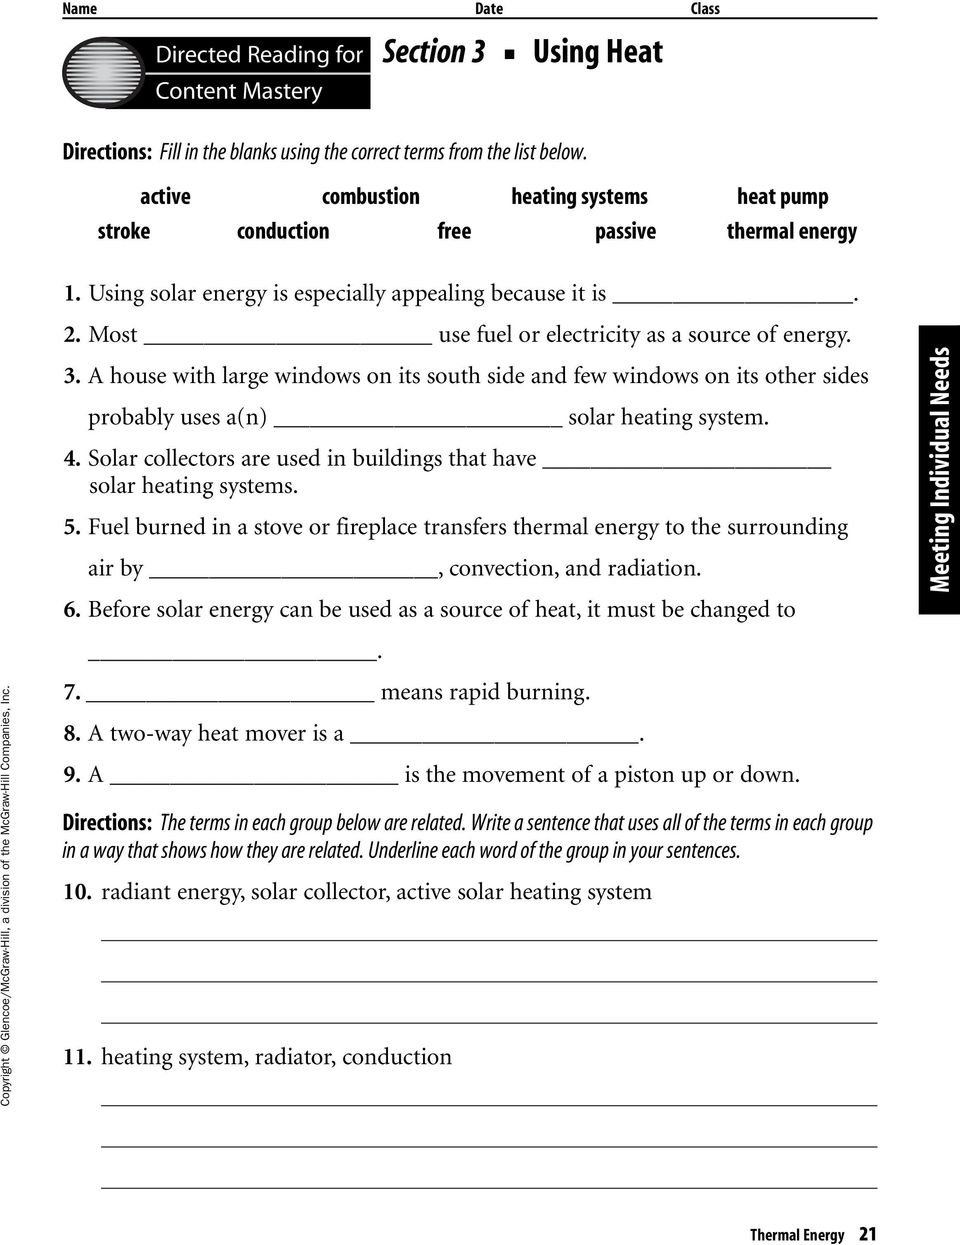 Thermal Energy Chapter Resources Includes Glencoe Science Intended For Section 3 Using Heat Worksheet Answers